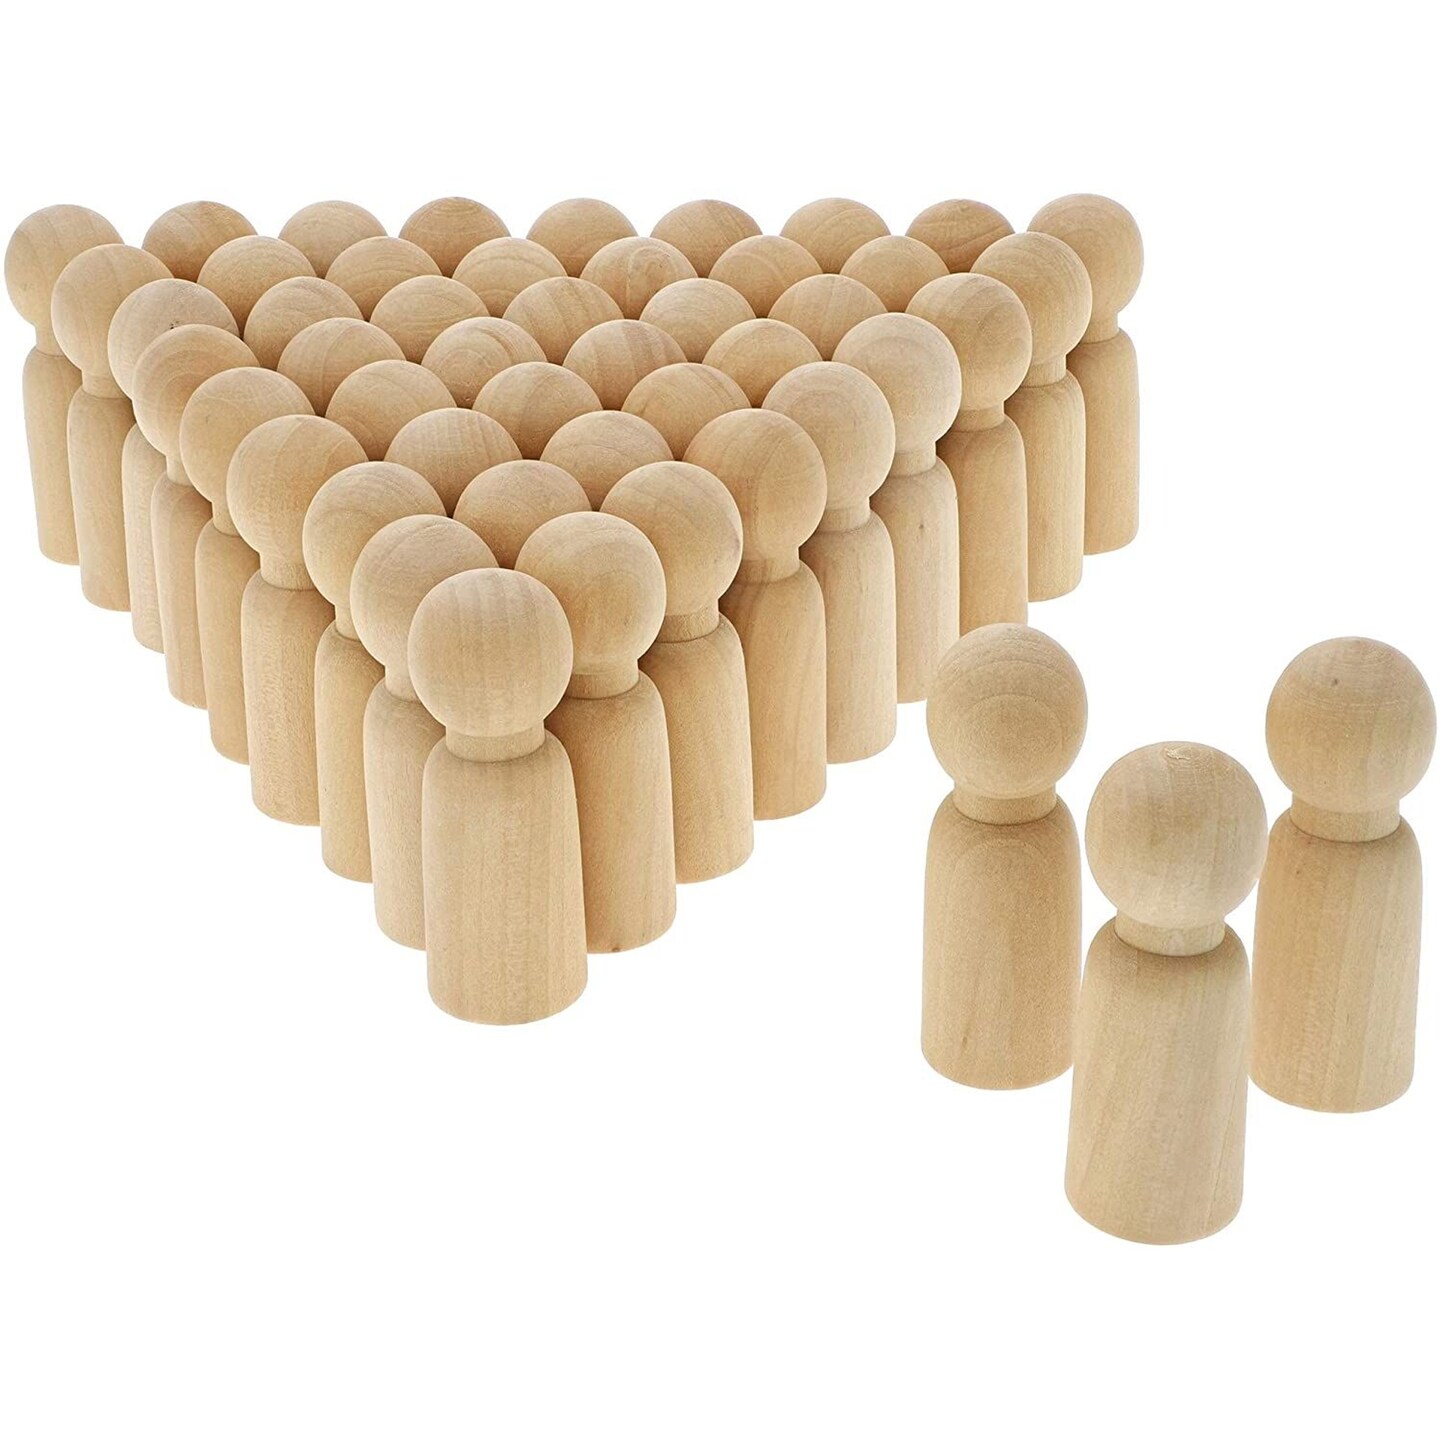 10pcs Wooden Peg Dolls Unfinished Wooden Tiny Doll Bodies People